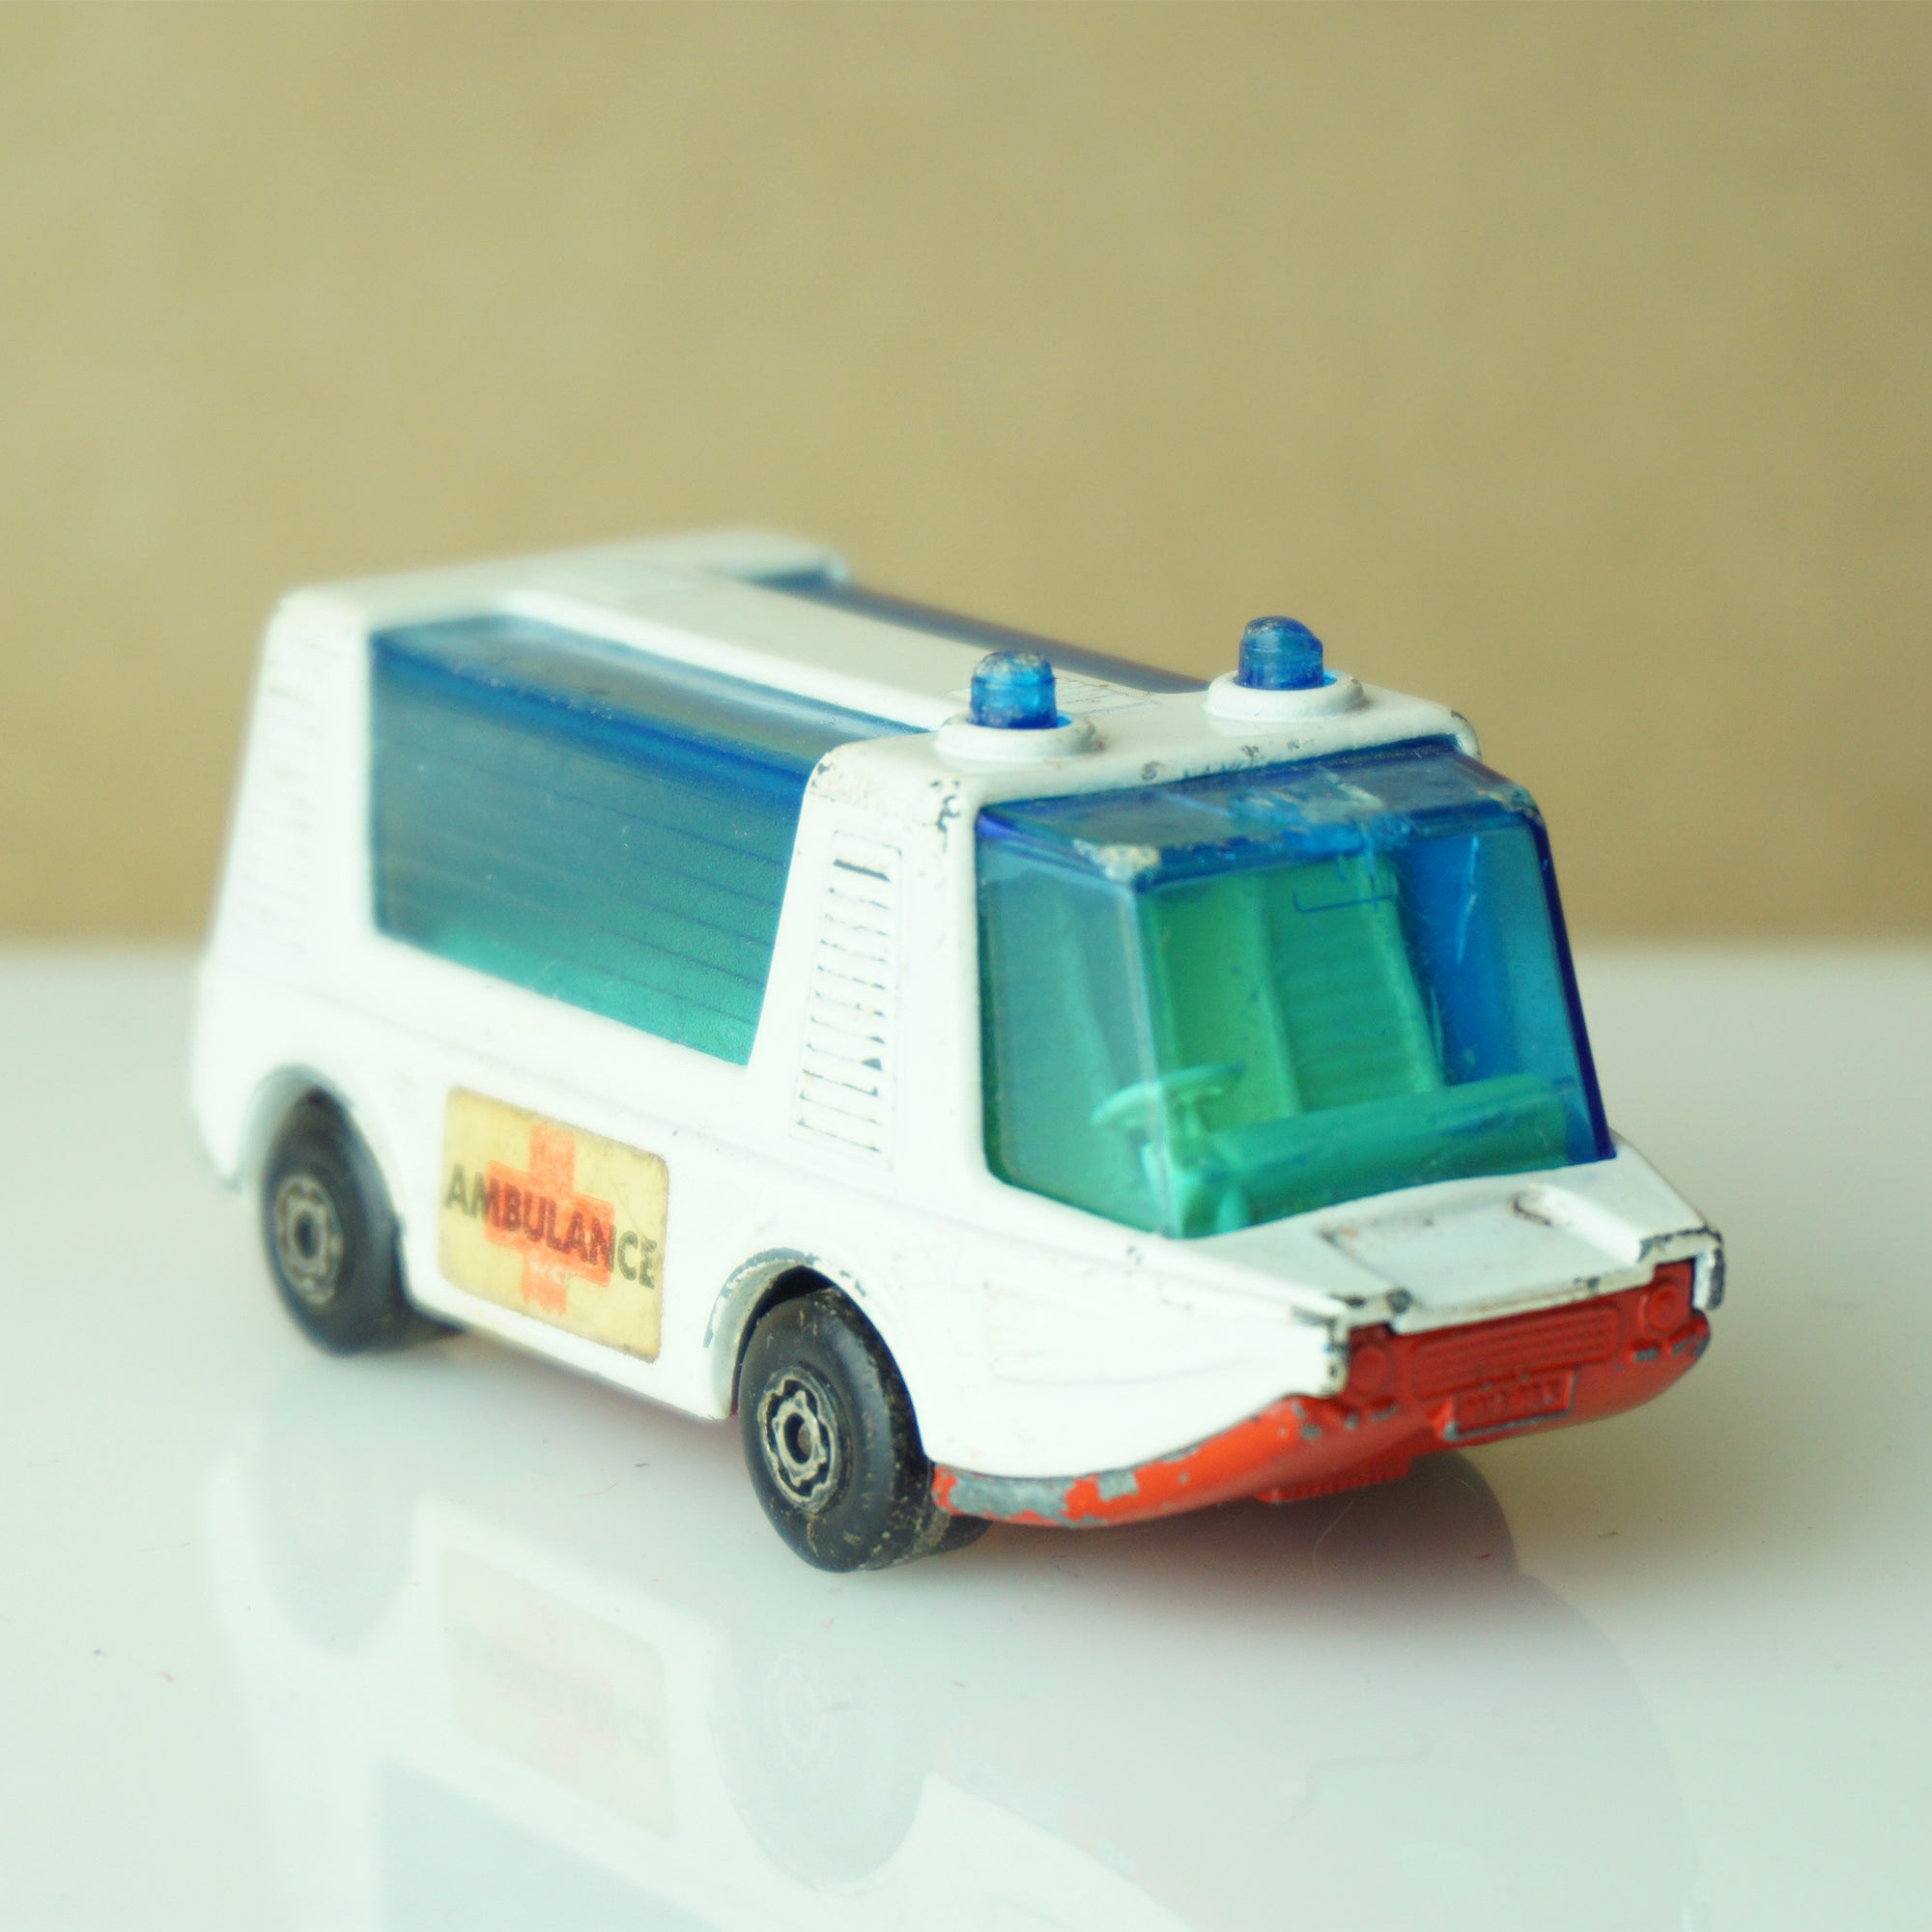 1971 Vintage Diecast MATCHBOX Superfast MB 64 Stretcha Fetcha Ambulance. Made in England by Lesney.